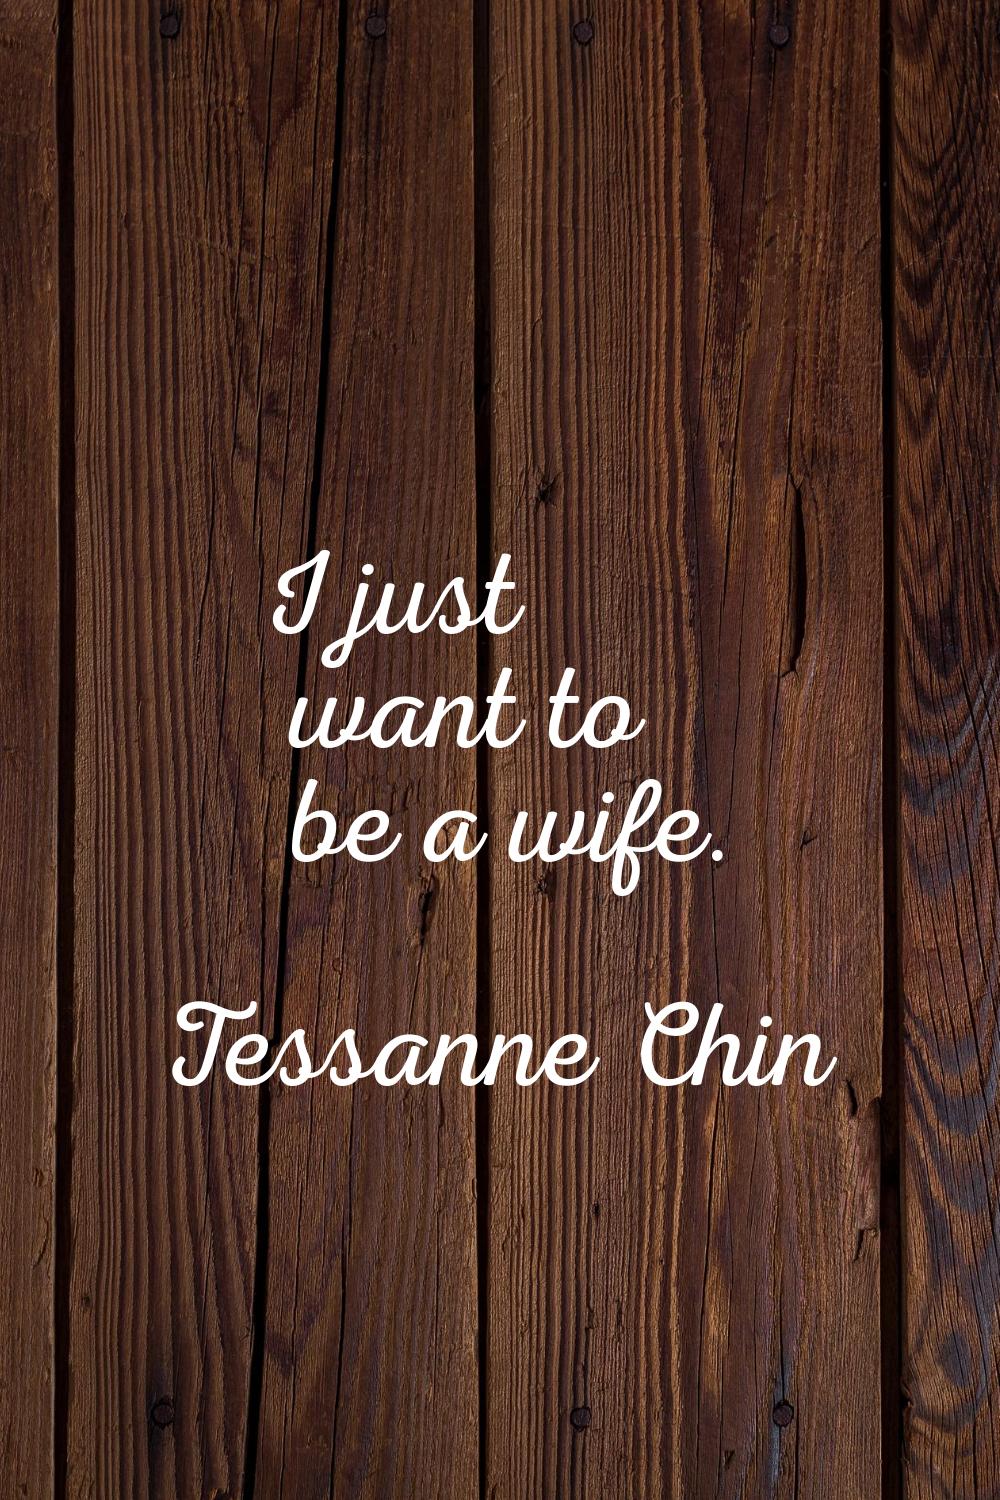 I just want to be a wife.